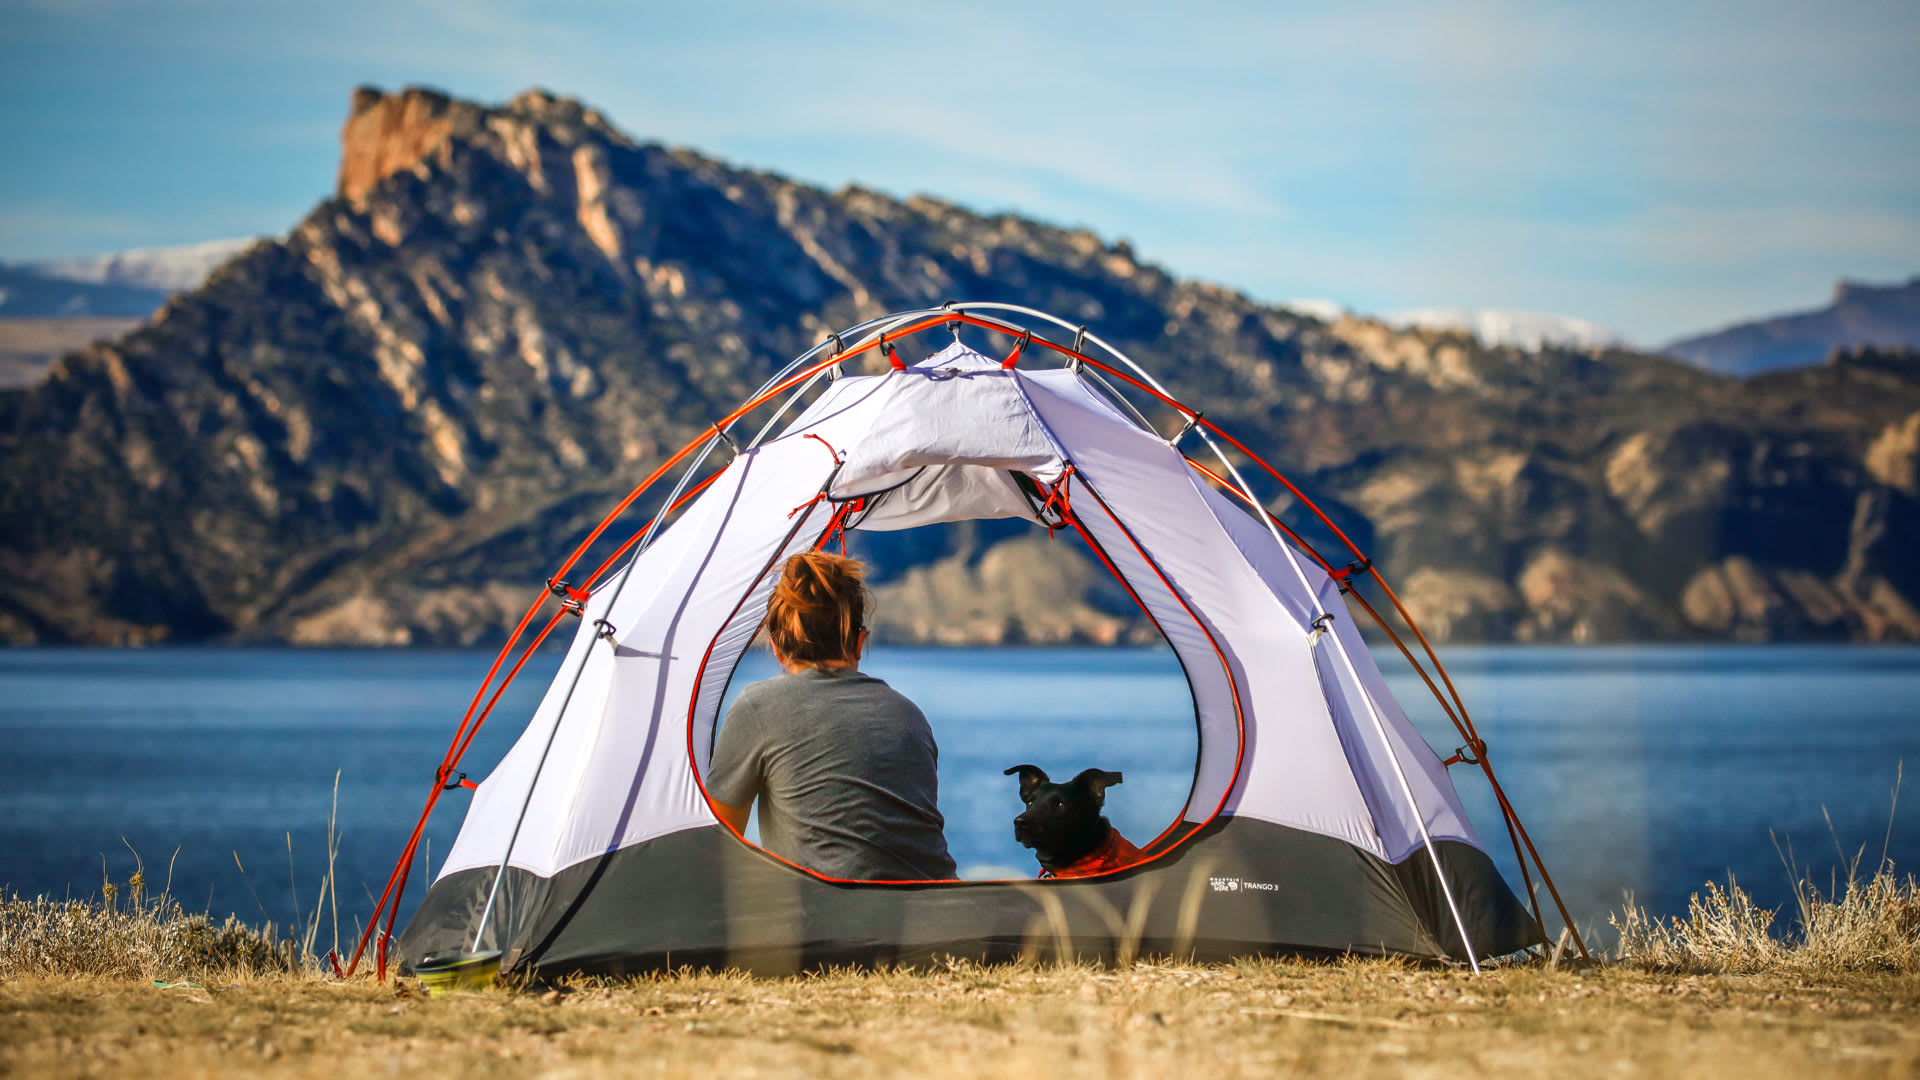 Hipcamp raises $25 million to lure more people out of the great indoors